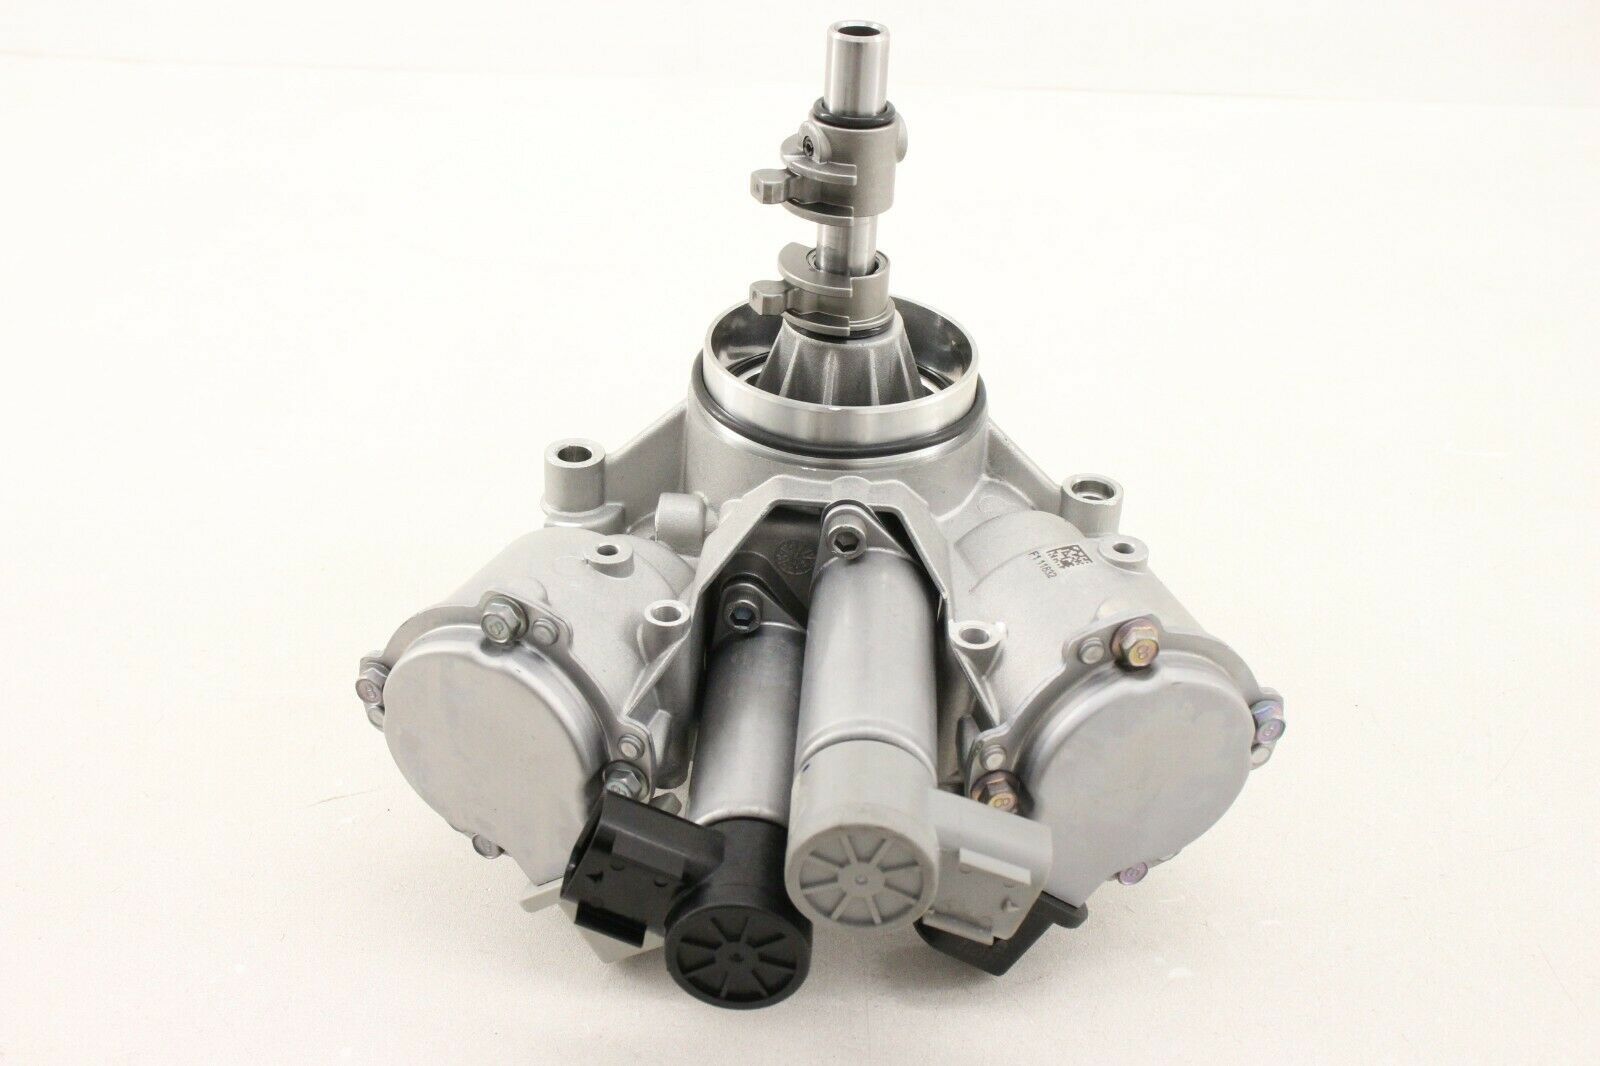 veloster dual clutch transmission